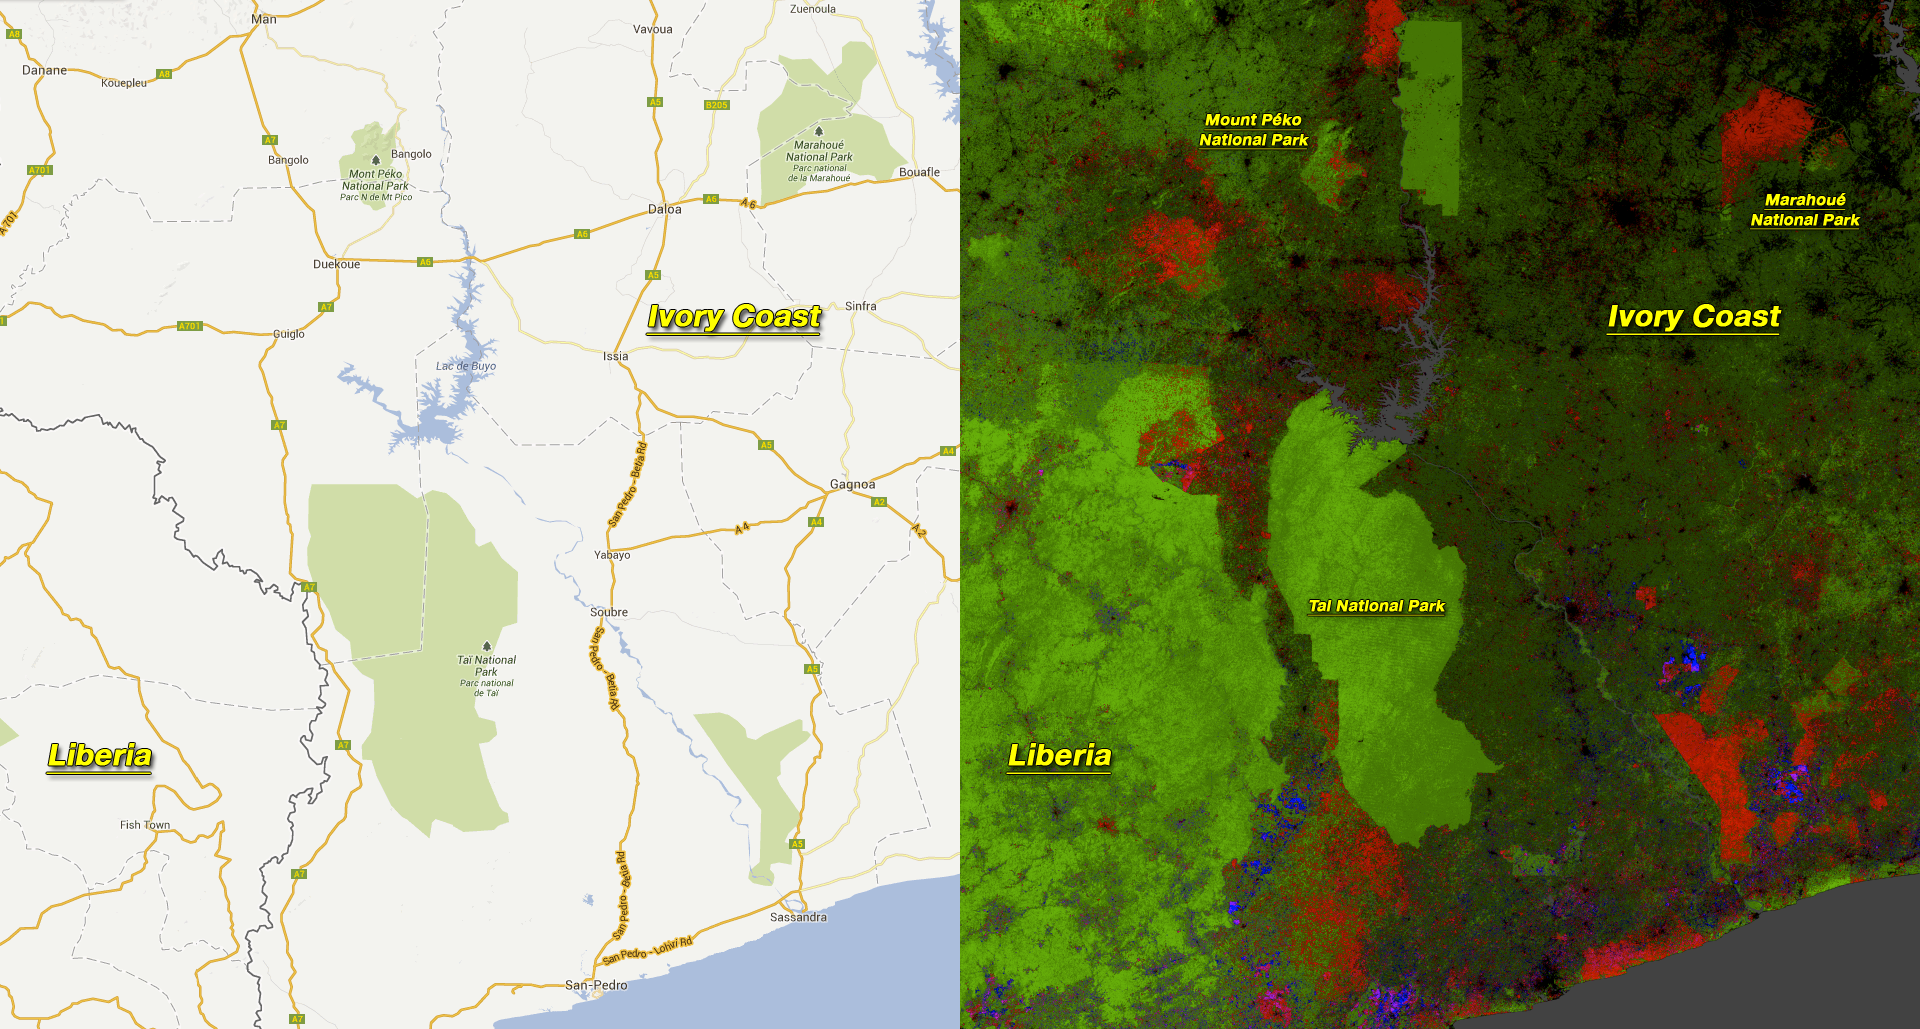 Civil unrest in Côte d'Ivoire was associated with widespread deforestation in national parks, including Marahoué National Park. Other protected areas, such as Tai National Park, remained intact. Image Credit: NASA Goddard, based on data from Hansen et al., 2013.